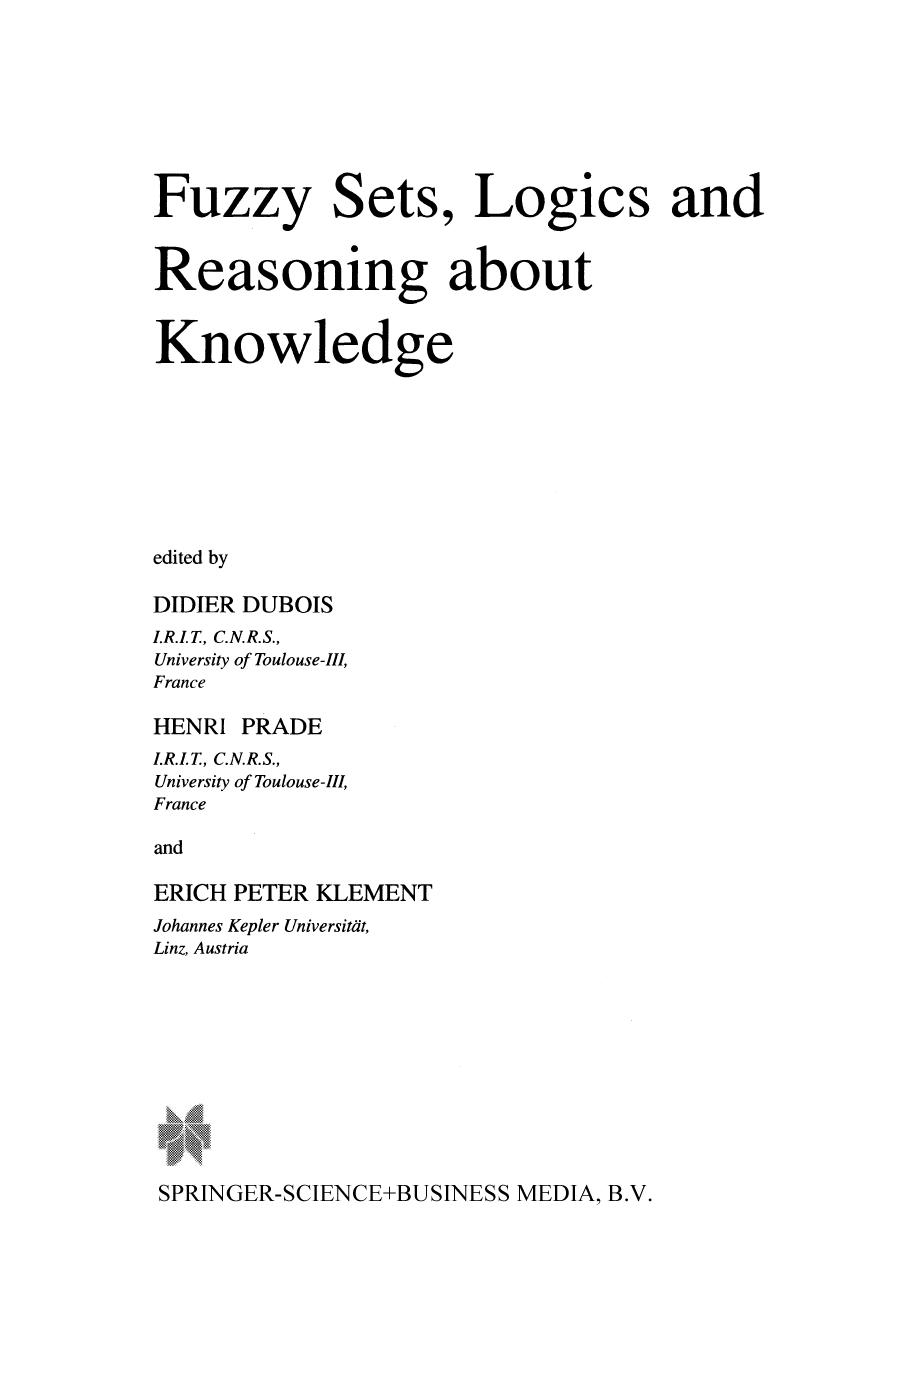 Fuzzy Sets, Logics and Reasoning About Knowledge